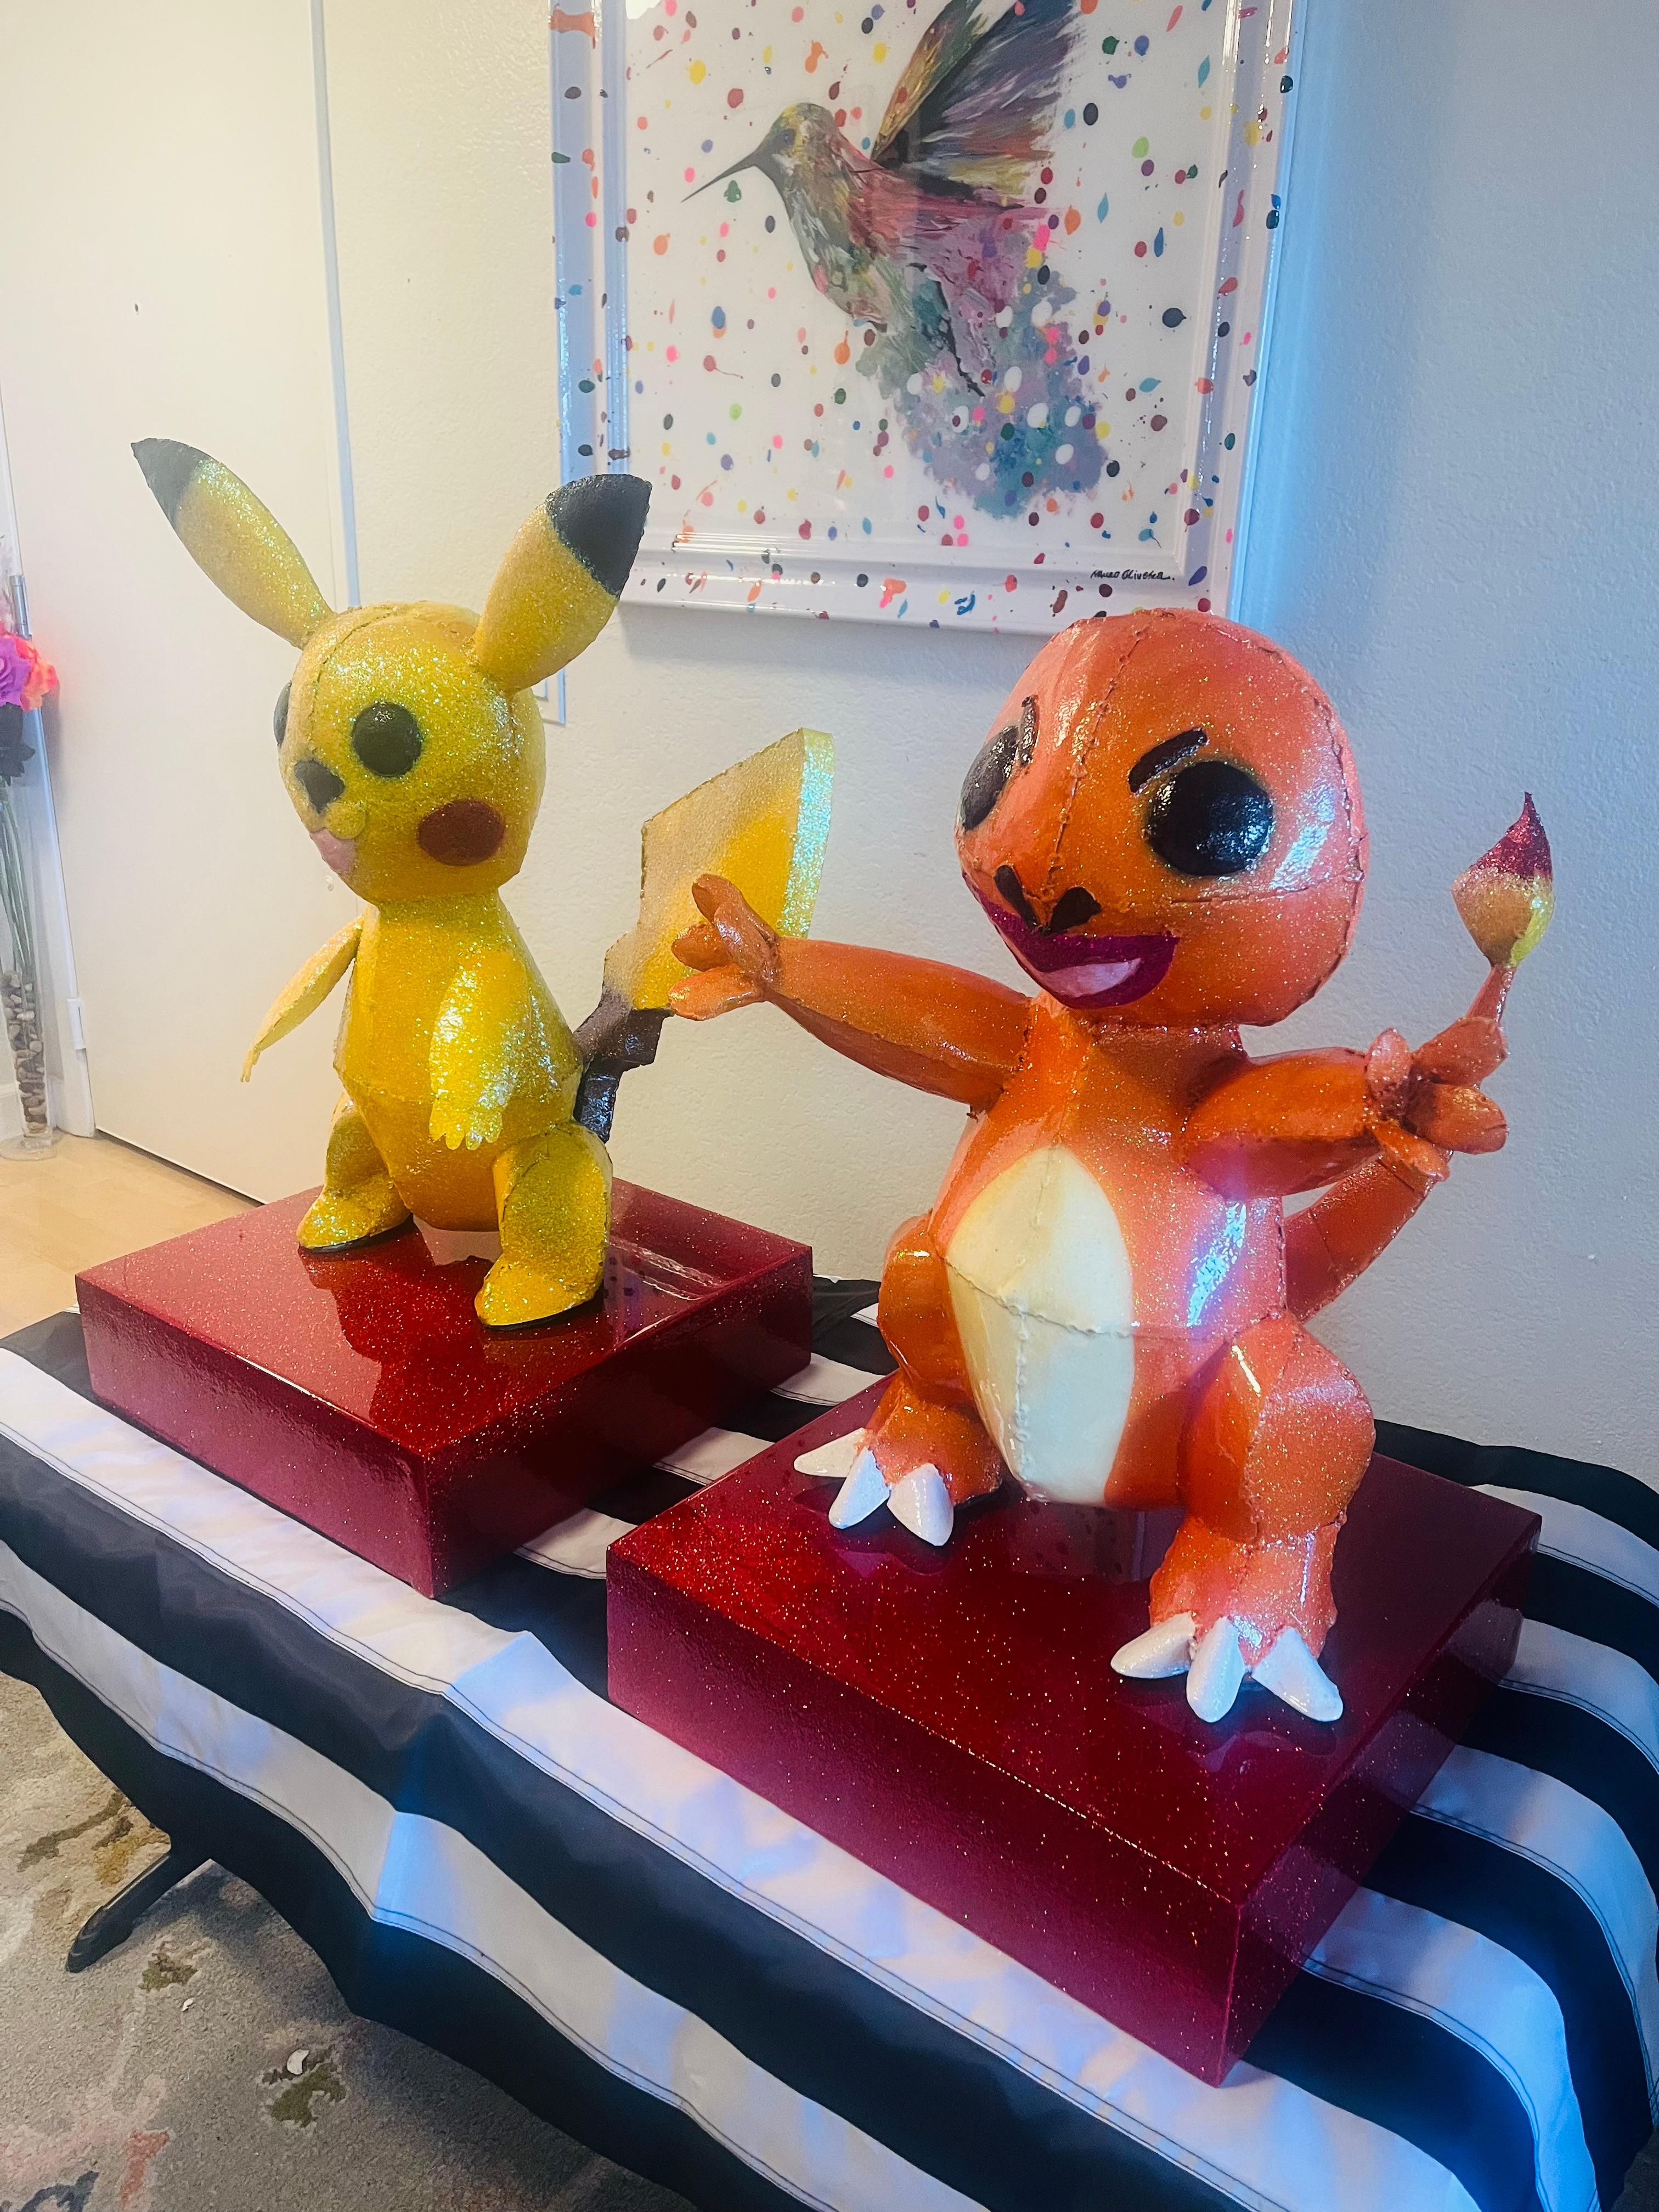               **ANNUAL SUPER SALE UNTIL MAY 15TH ONLY**
*This Price Won't Be Repeated Again This Year - Take Advantage Of It*

These two Pokemon pieces are the savvy collector a must have: there is nothing like them on planet earth.

They were made